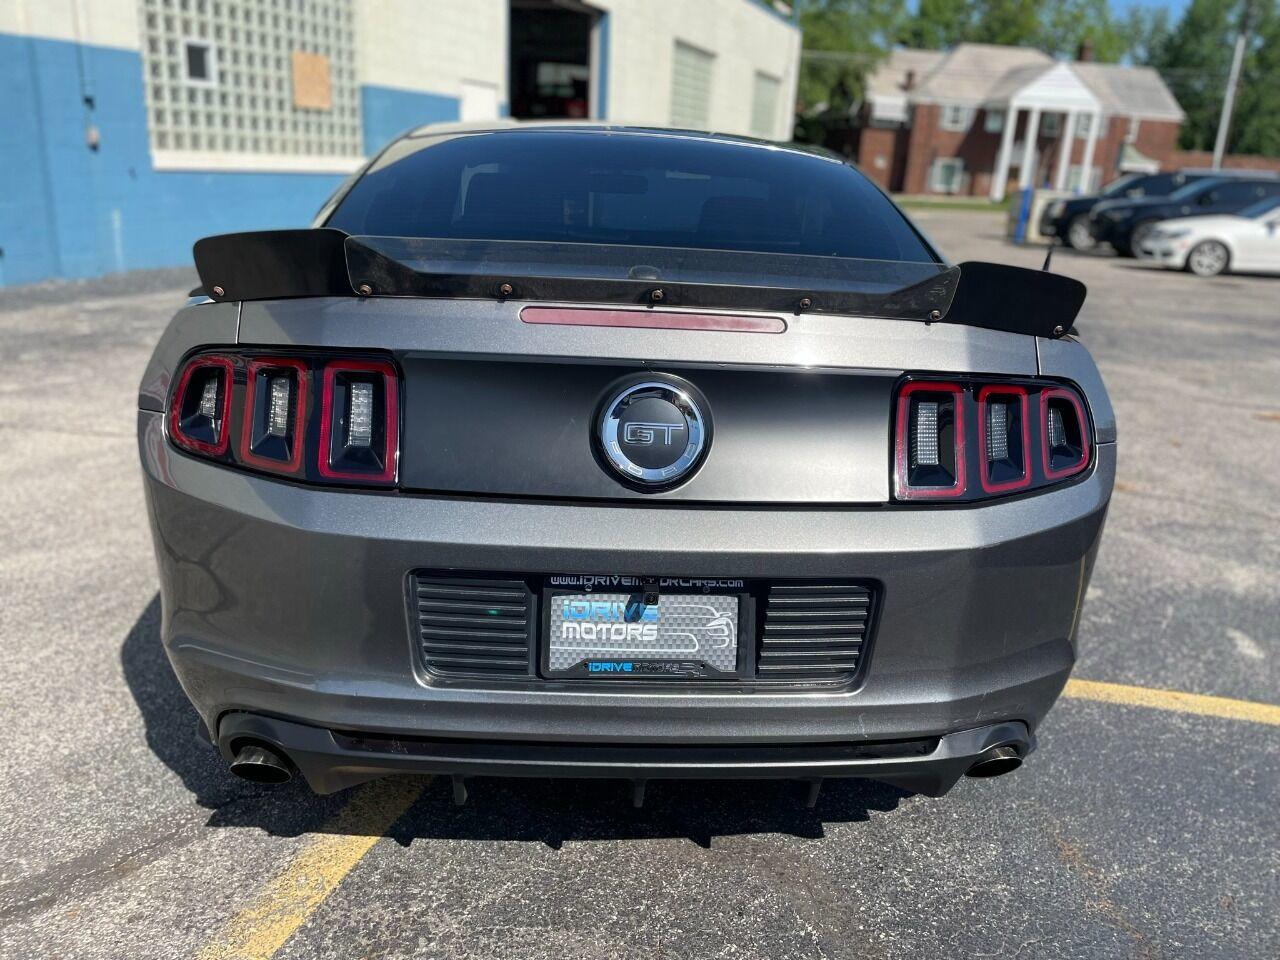 2014 Ford Mustang GT Premium 2dr Fastback